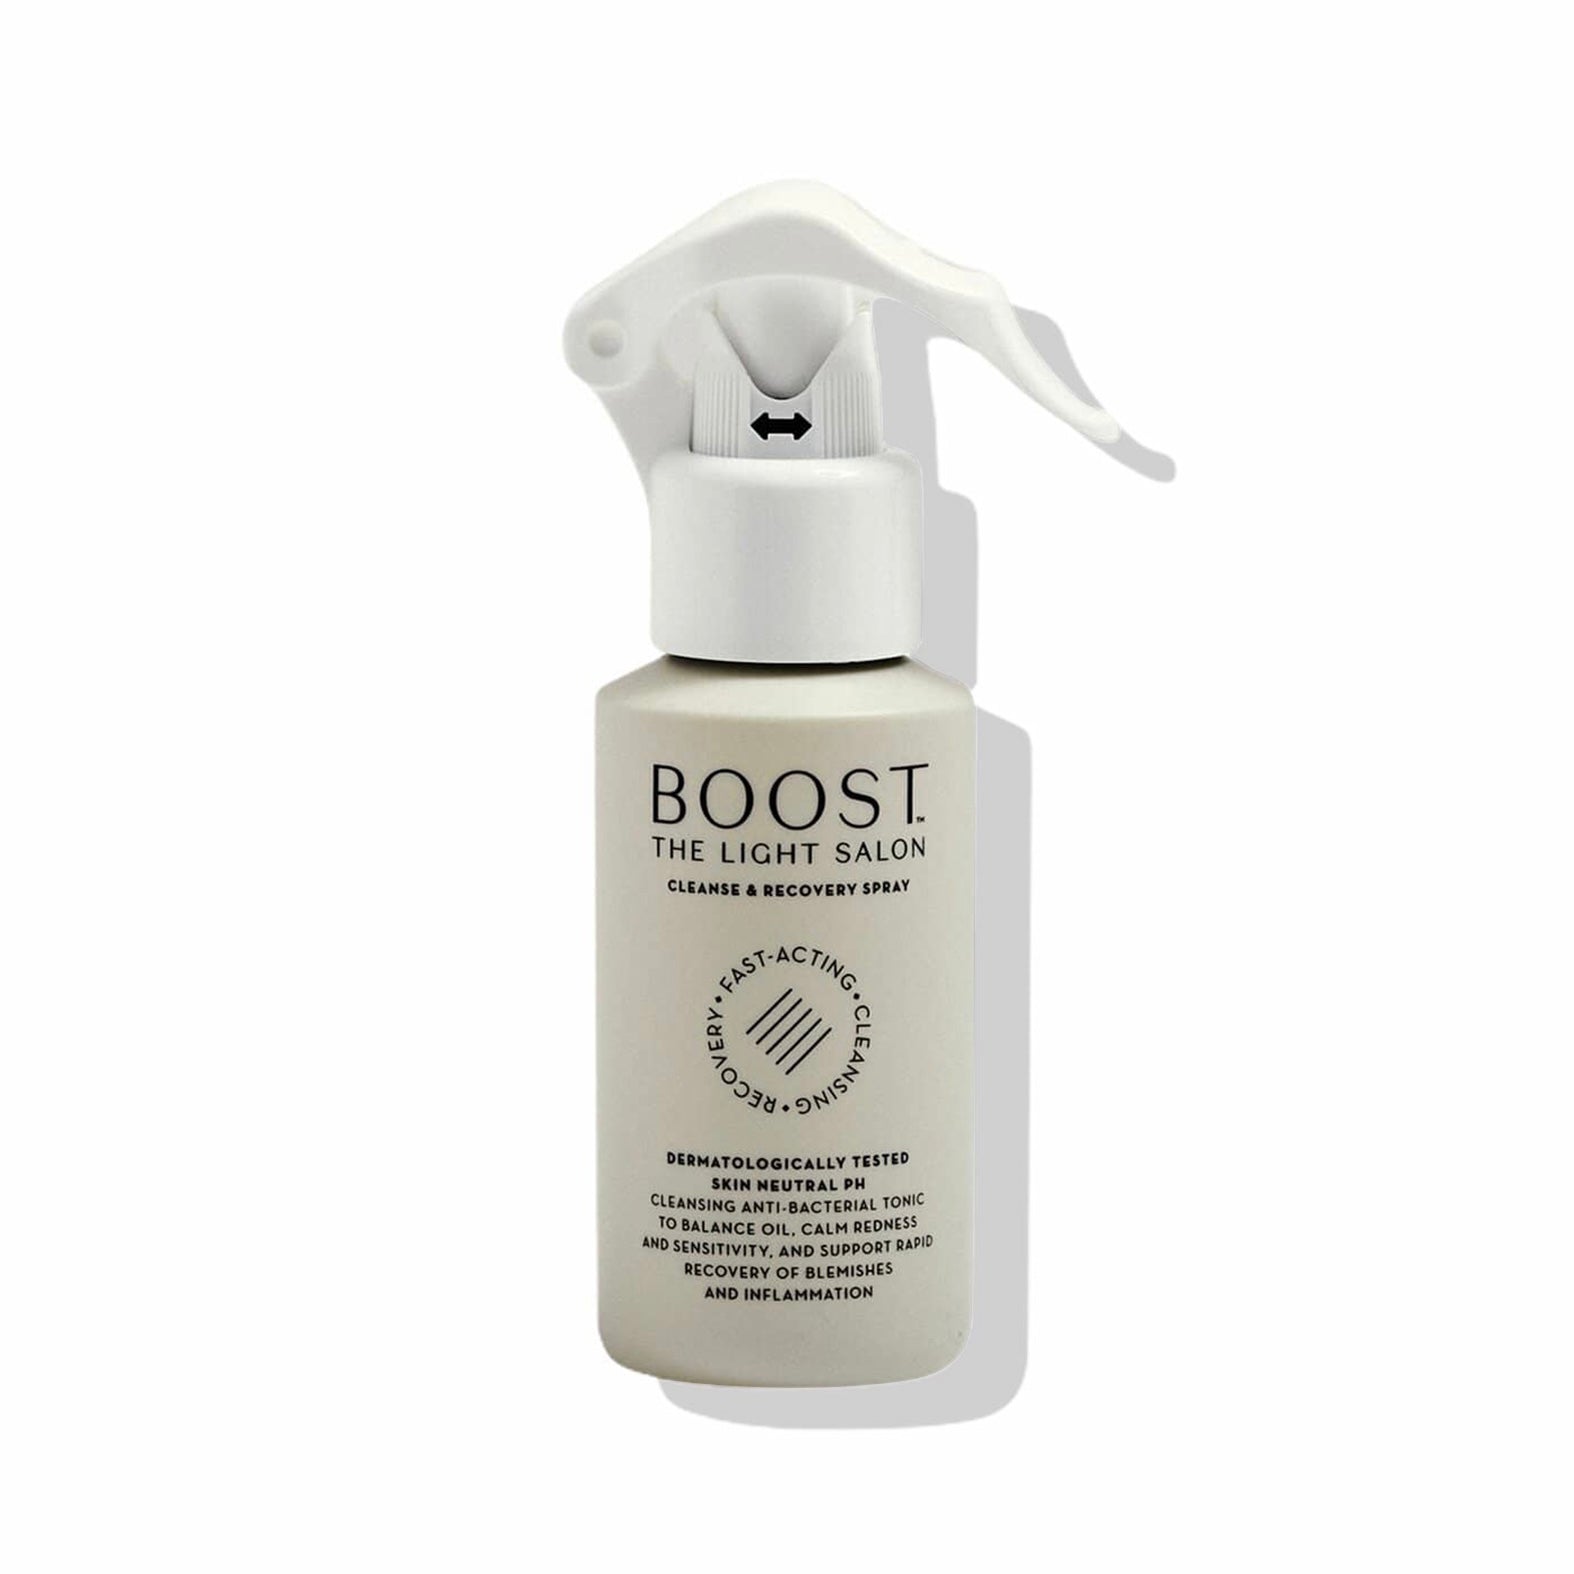 Cleanse & Recovery Spray